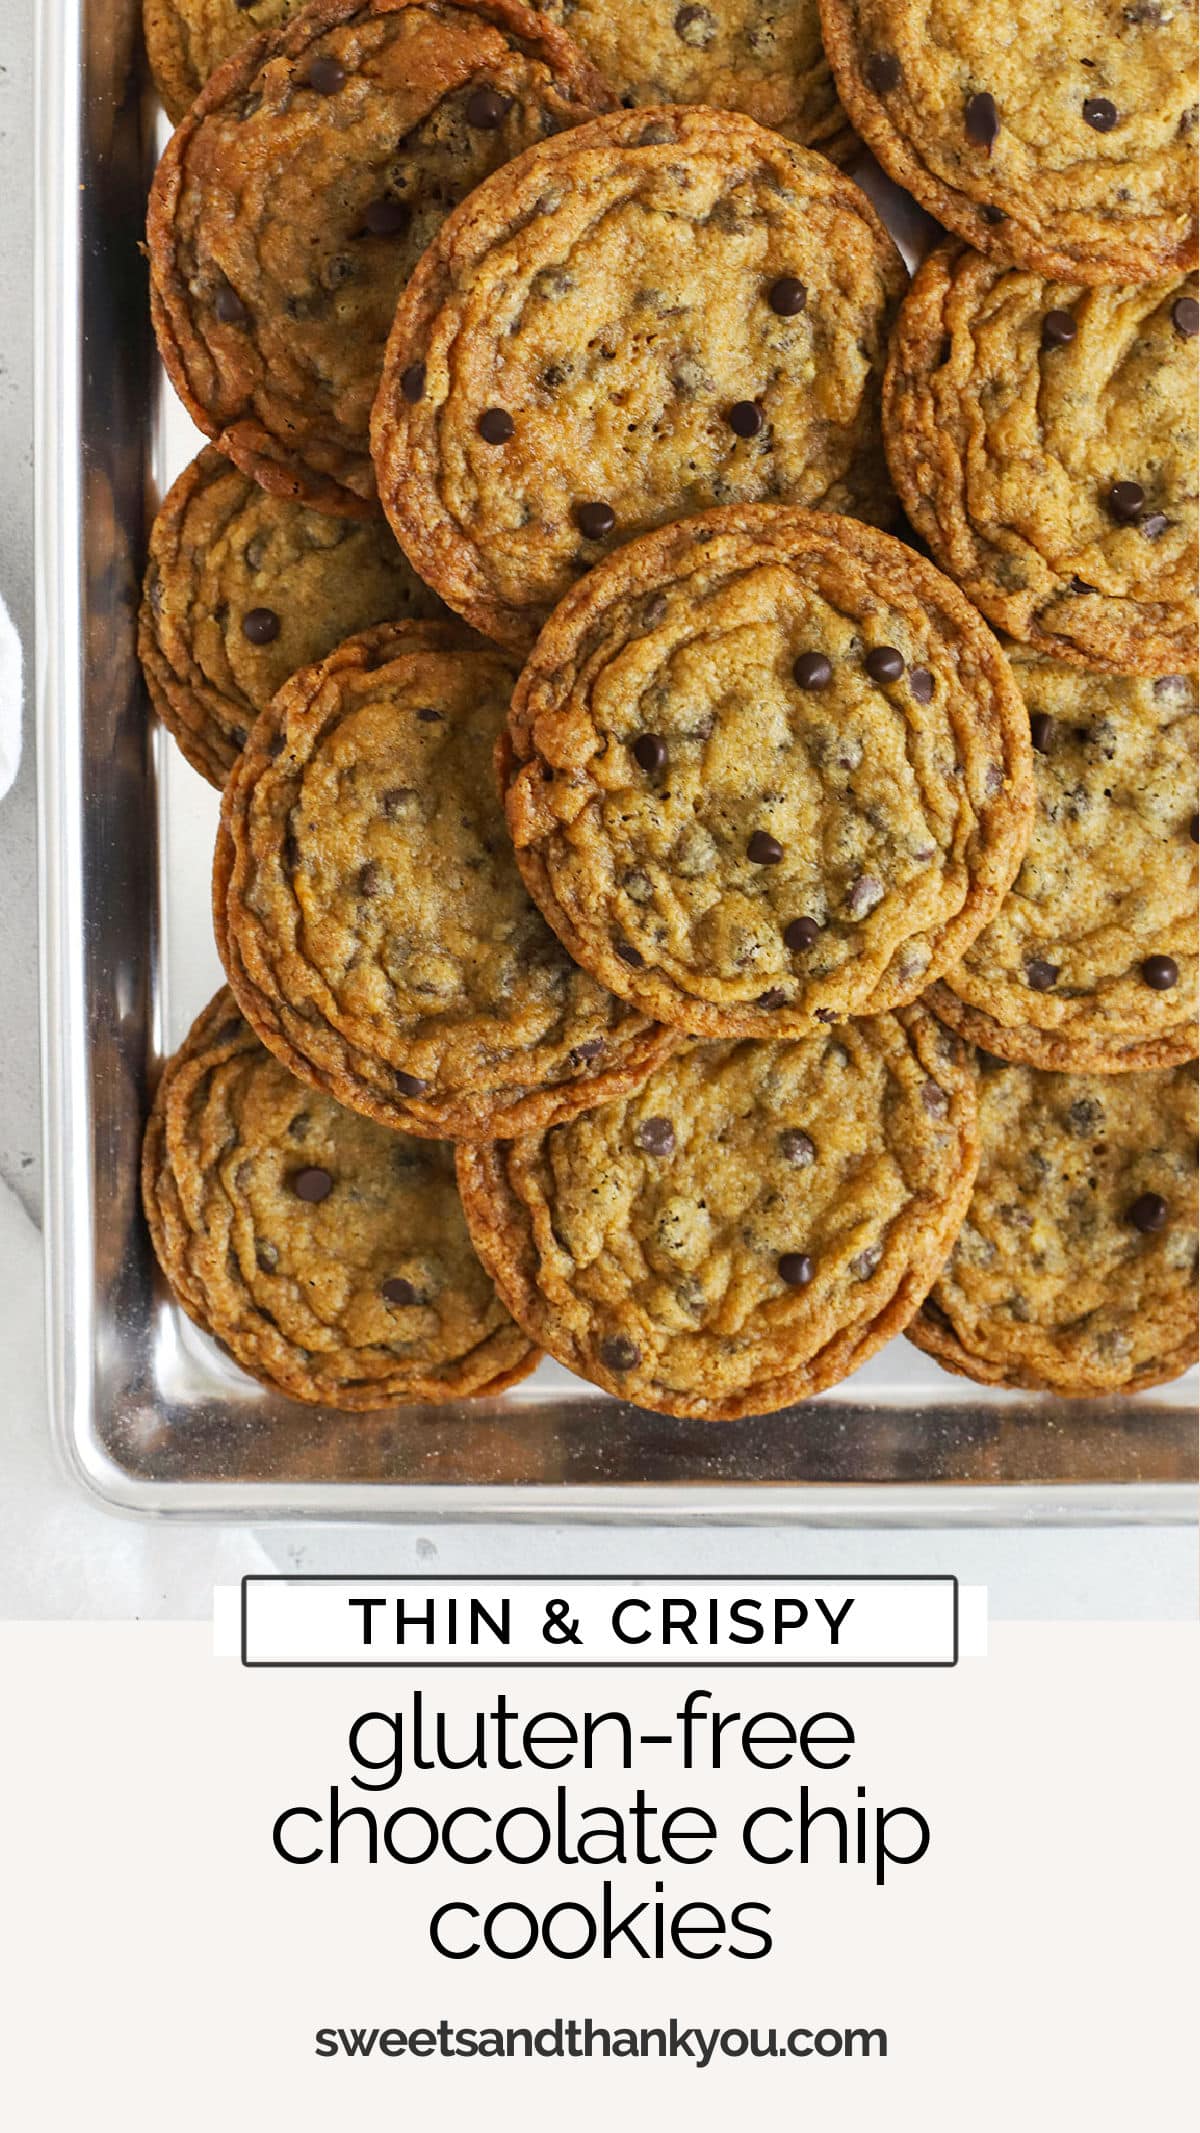 Calling all crispy cookie lovers! These Thin & Crispy Gluten-Free Chocolate Chip Cookies have all the classic flavor you crave, with a satisfying snap! / crisp gluten free chocolate chip cookie recipe / gluten-free chocolate chip cookies / the best gluten free chocolate chip cookies / tates bakeshop gluten free chocolate chip cookies / easy gluten free chocolate chip cookie recipe / gluten free cookies